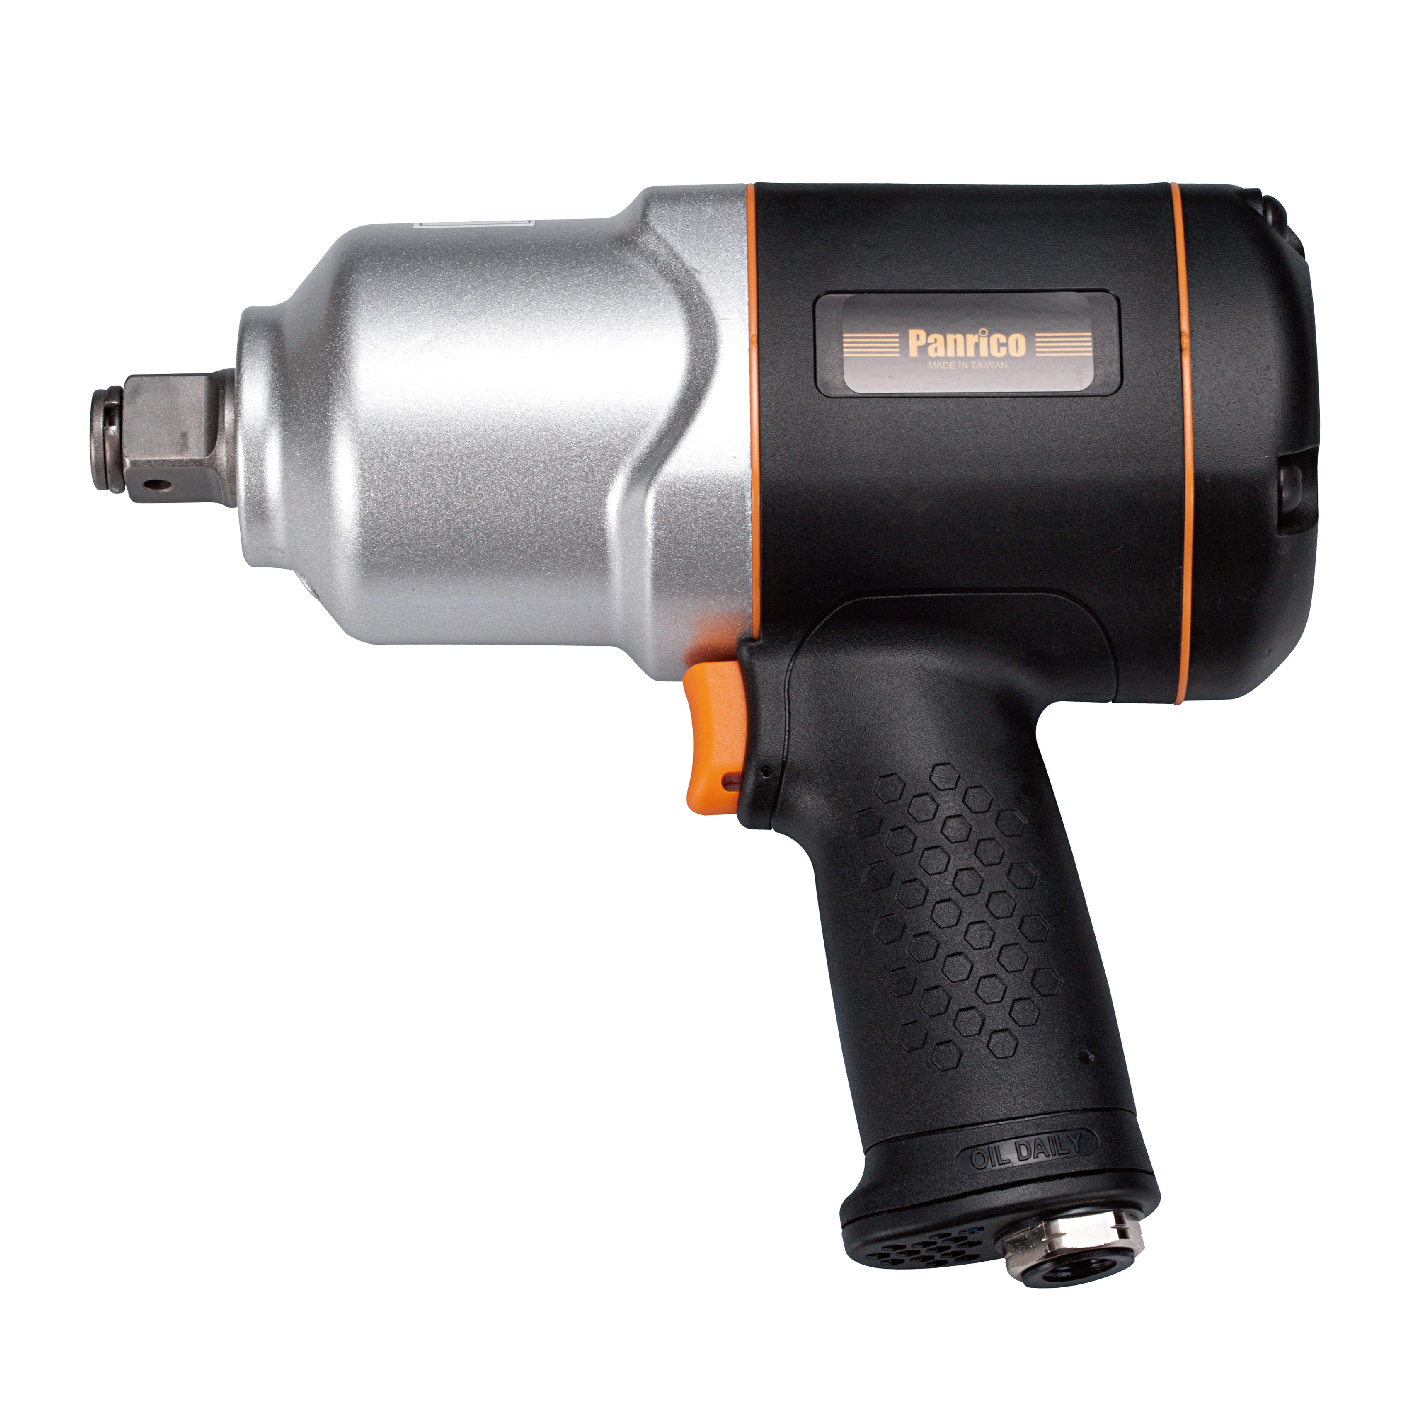 Truck / Agricultural / Heavy Duty Air Impact Wrench for Pneumatic (Air) Tools made by GOLDEN ROOT CO., LTD     金根貿易股份有限公司 - MatchSupplier.com